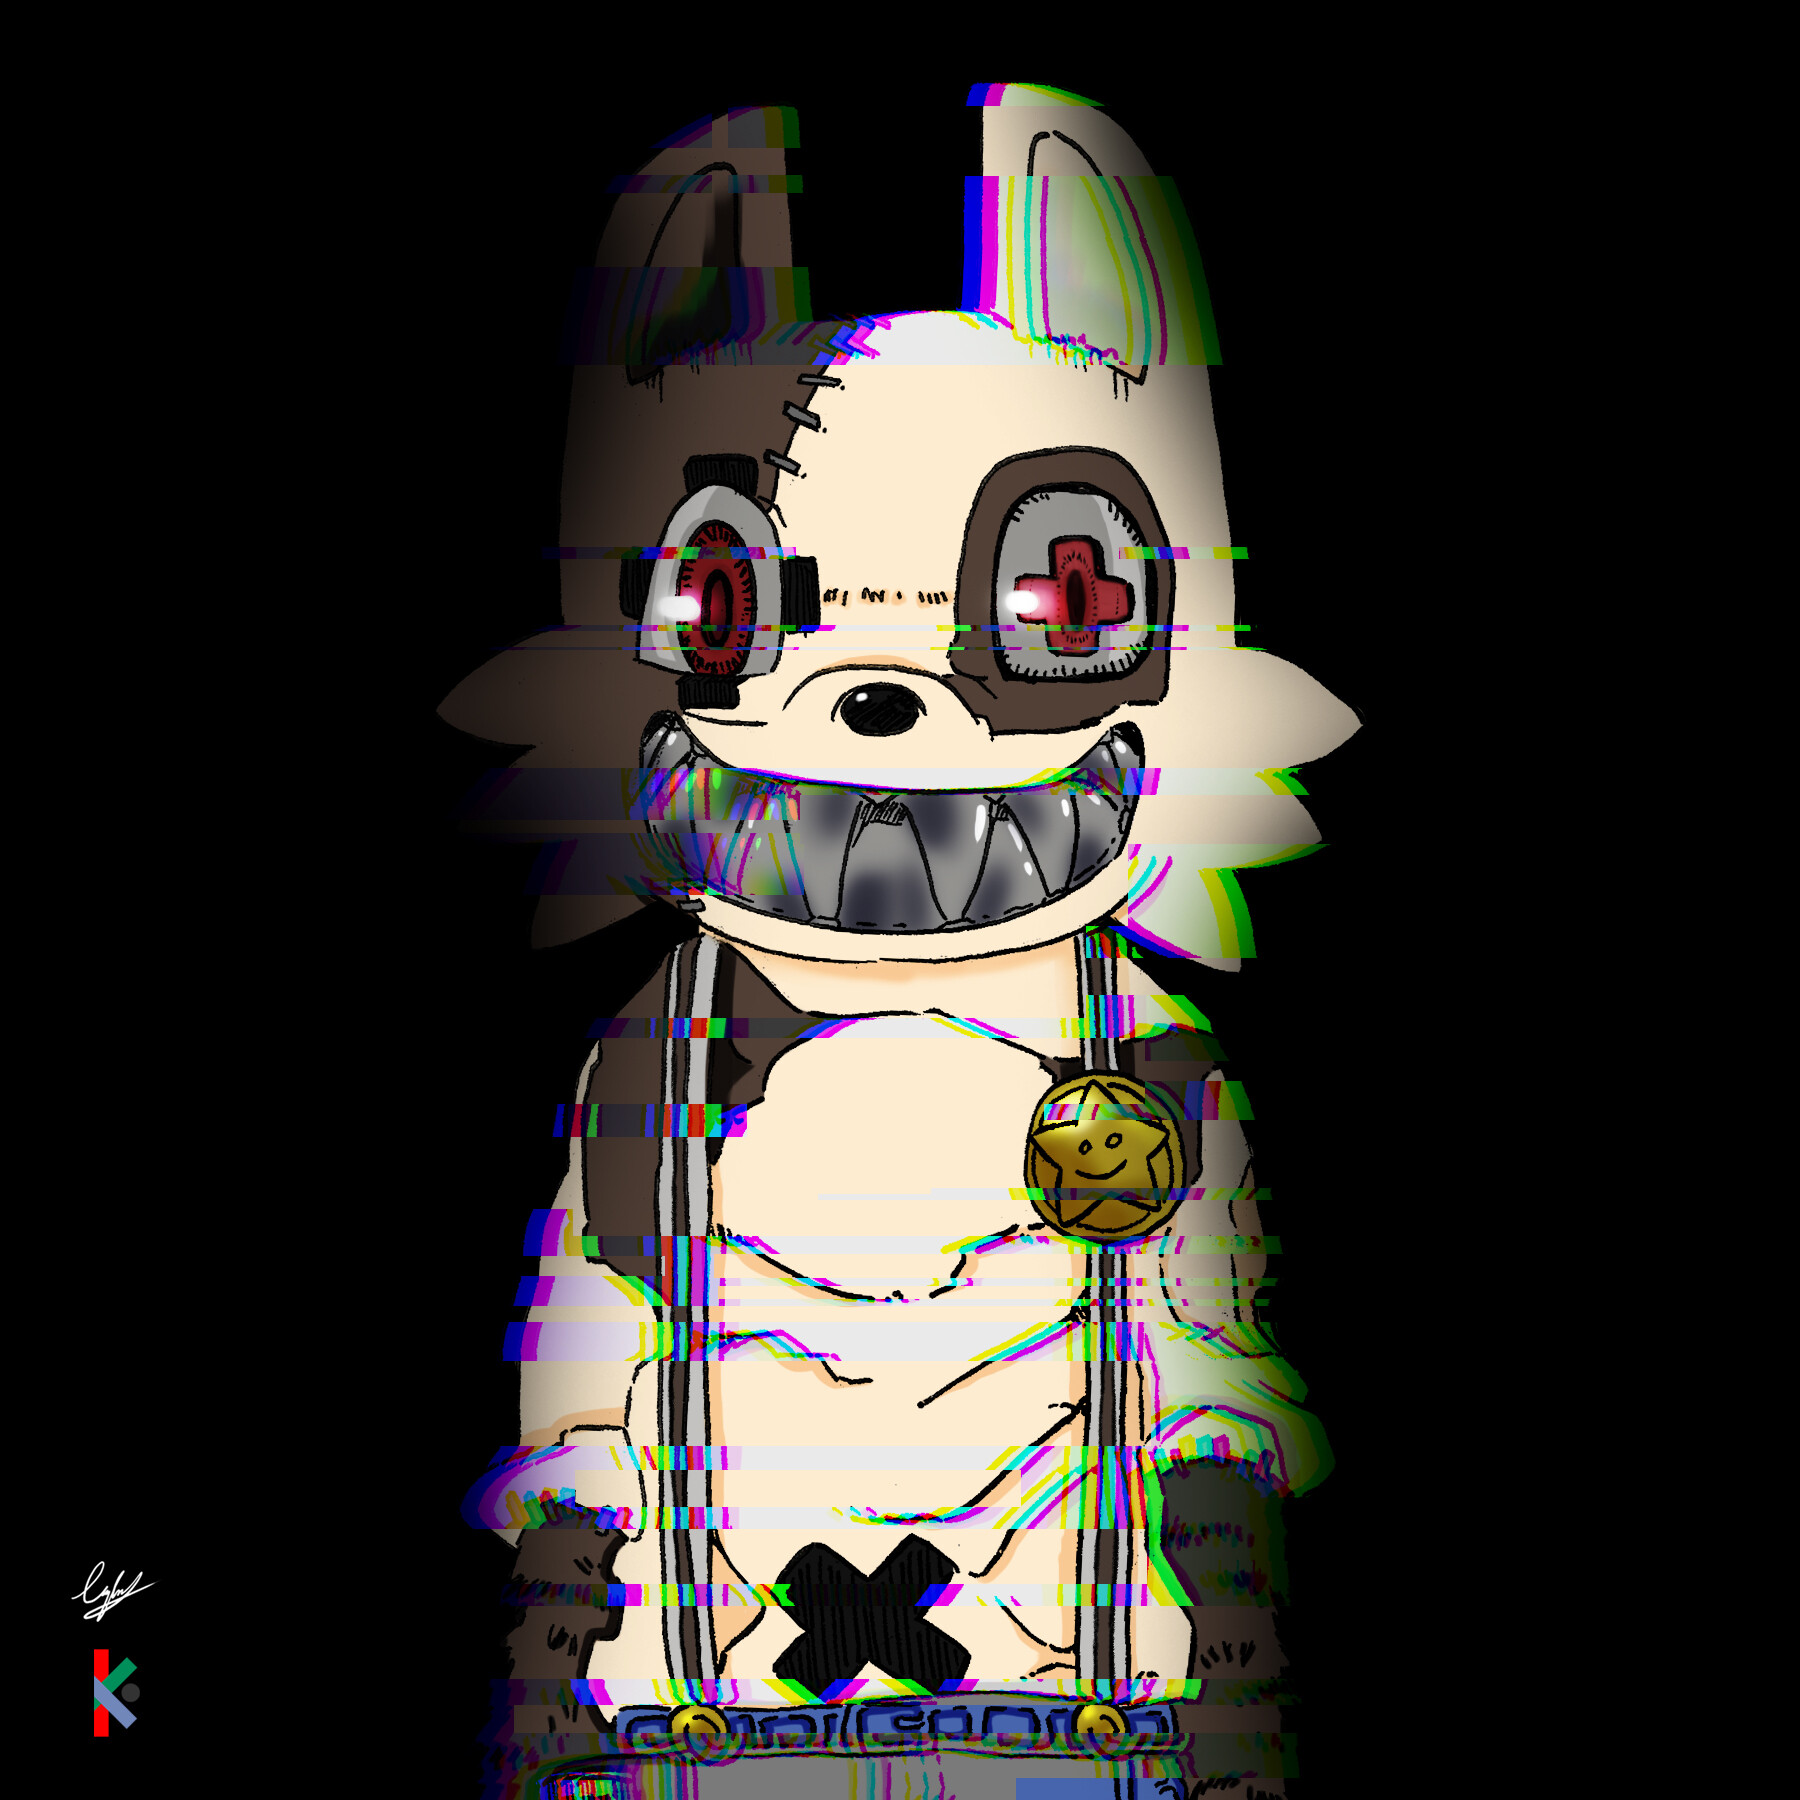 If Five Nights At Freddys Was An Anime, It Would Be Gleipnir